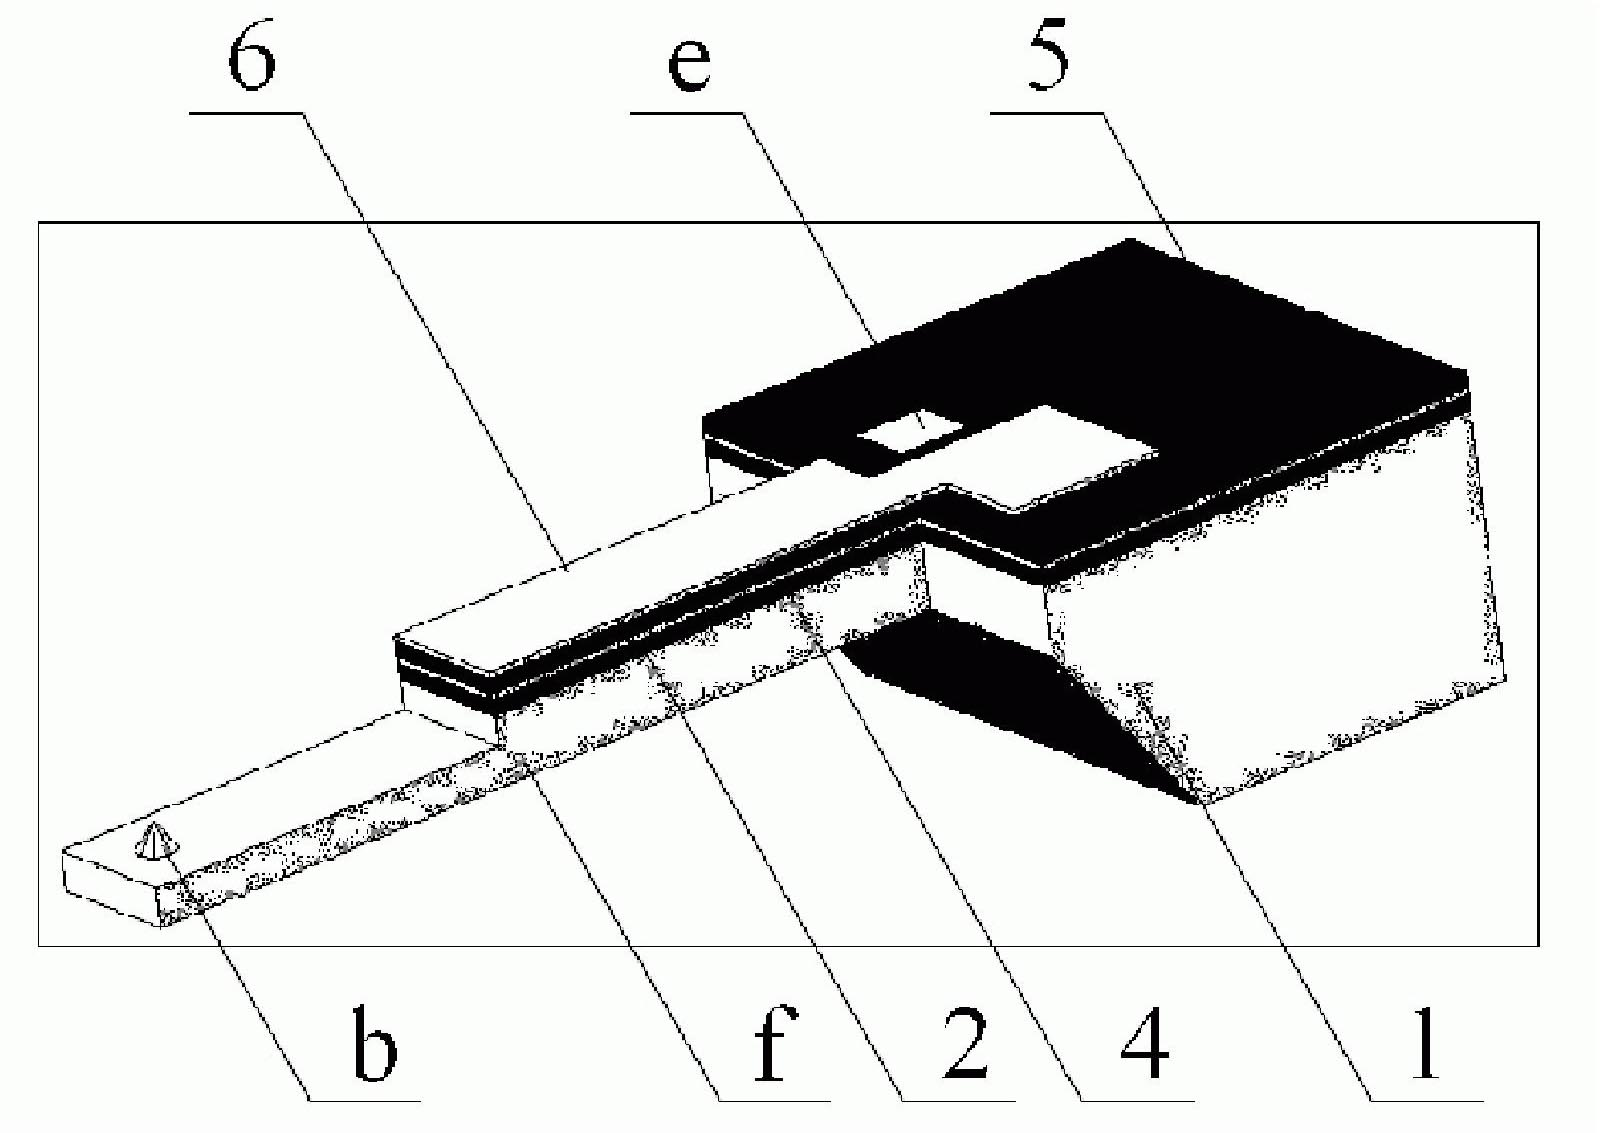 Manufacturing method of a piezoelectric micro-cantilever beam probe